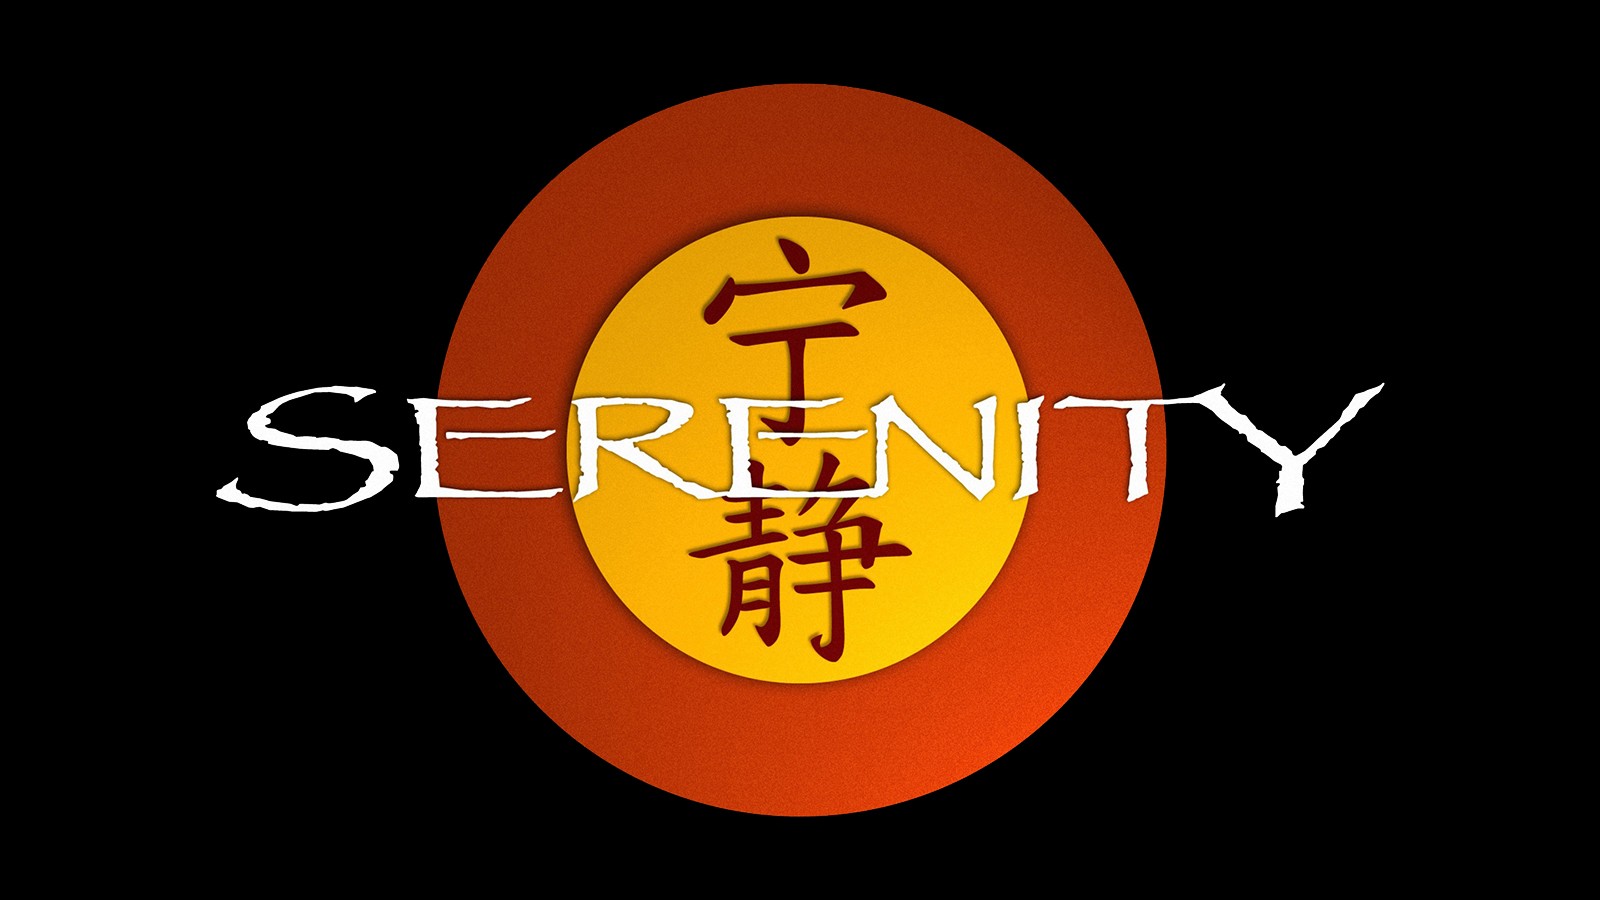 General 1600x900 Serenity Firefly circle TV series black background simple background digital art